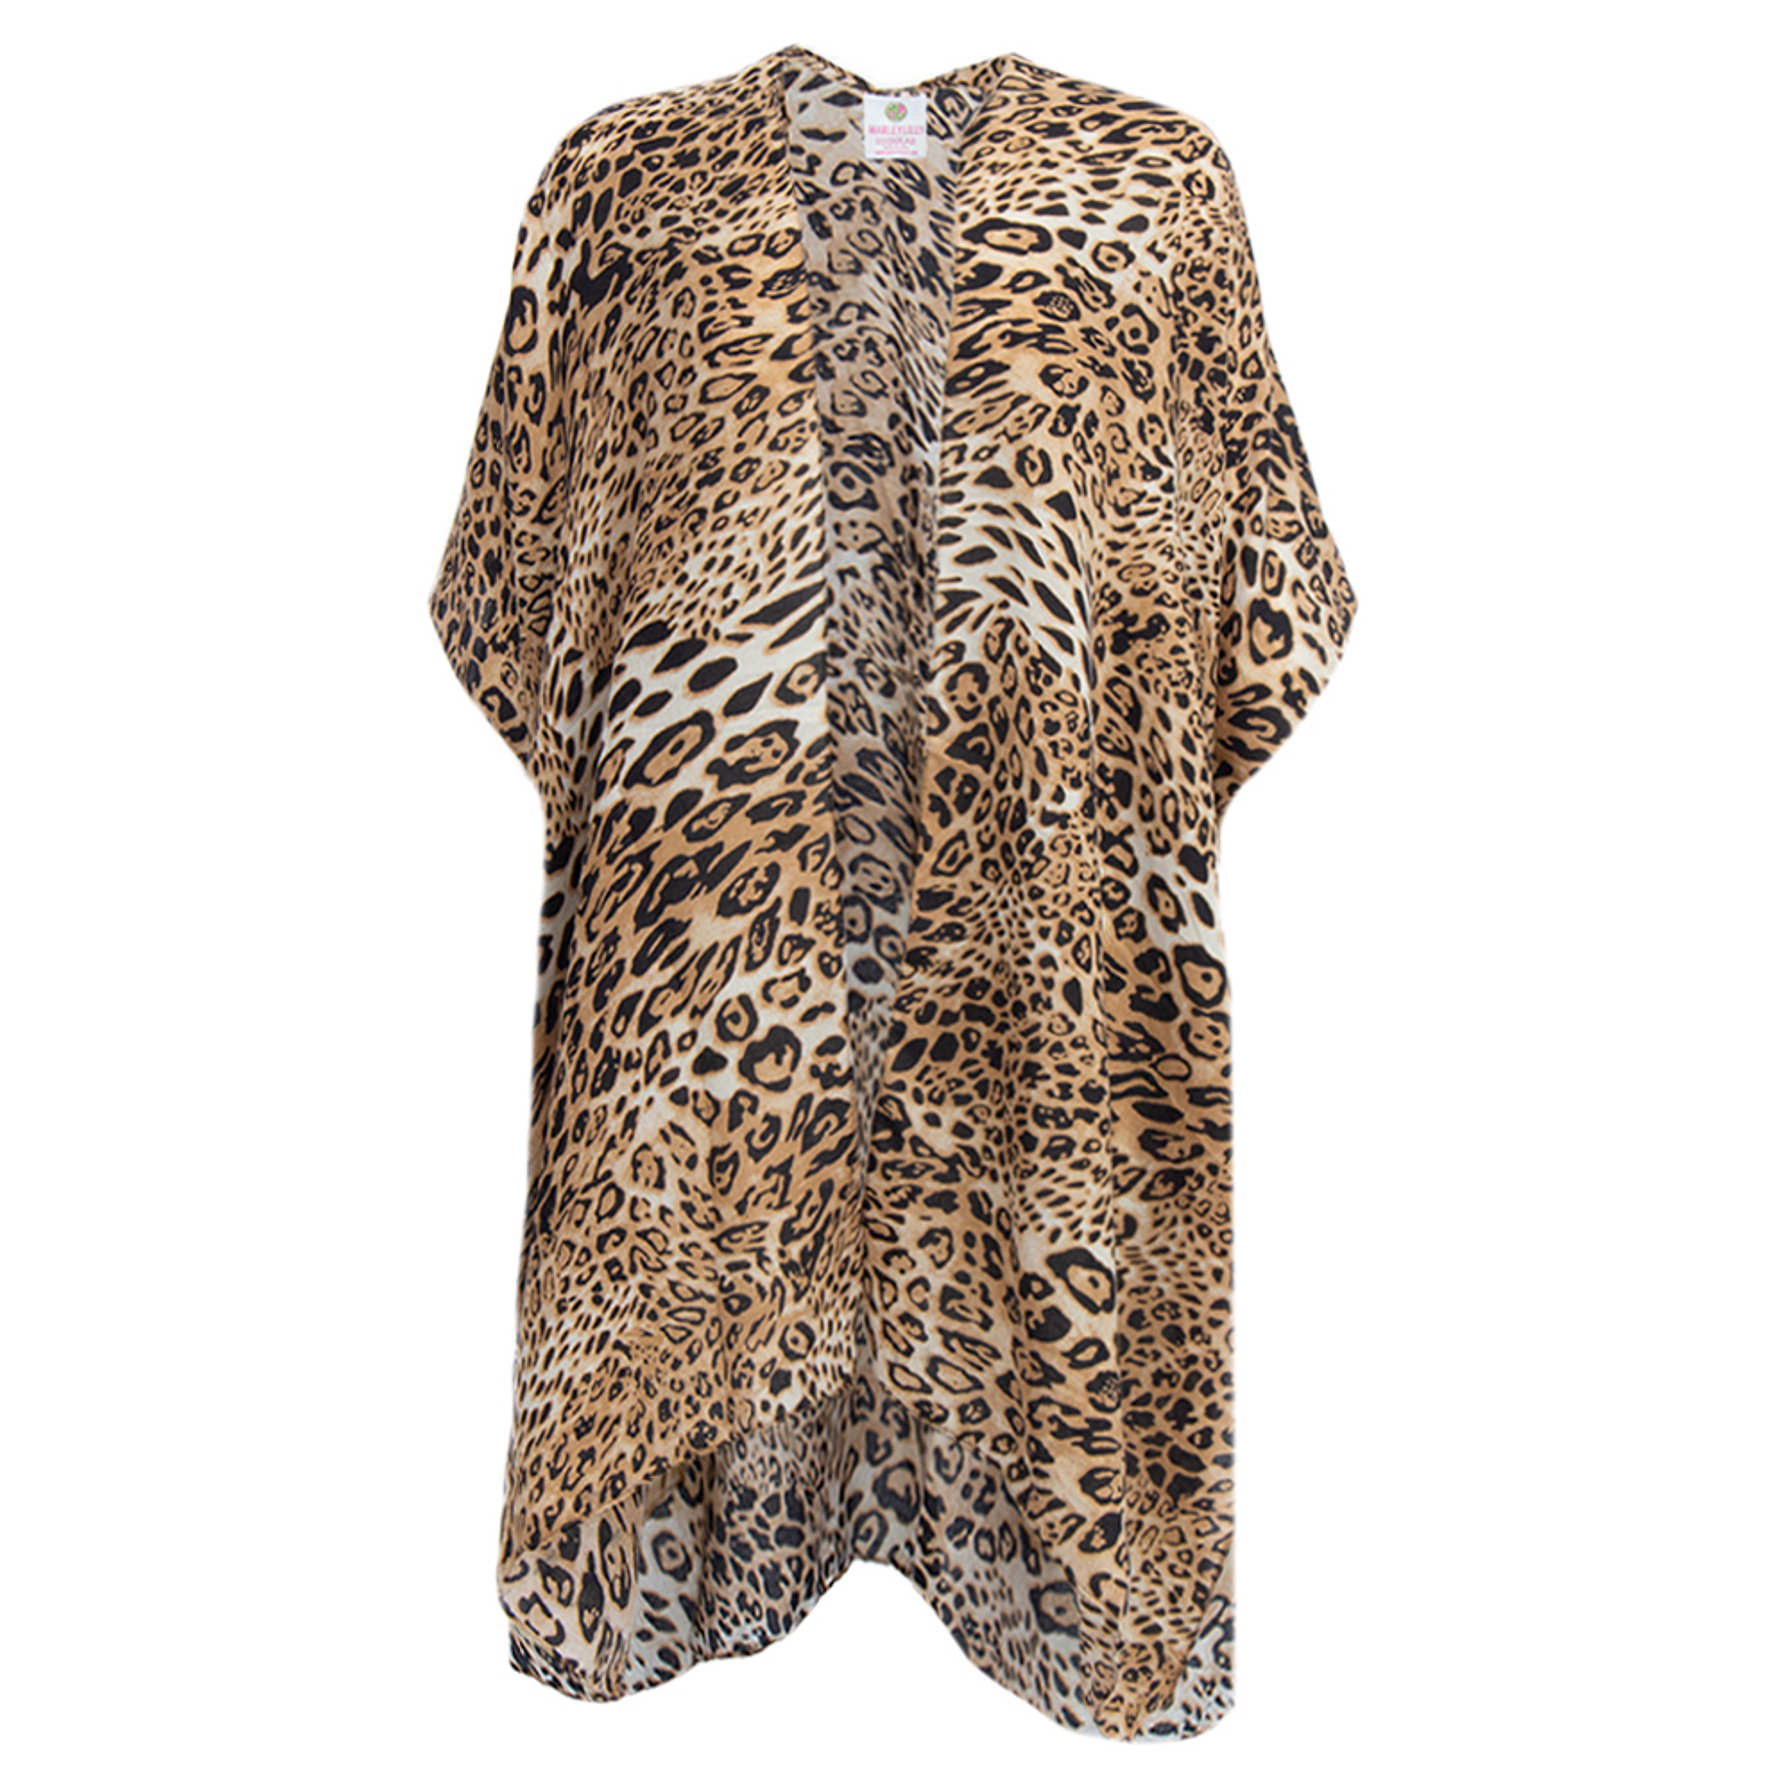 Leopard Kimono - Sheer Leopard Cover Up w/ Open Front